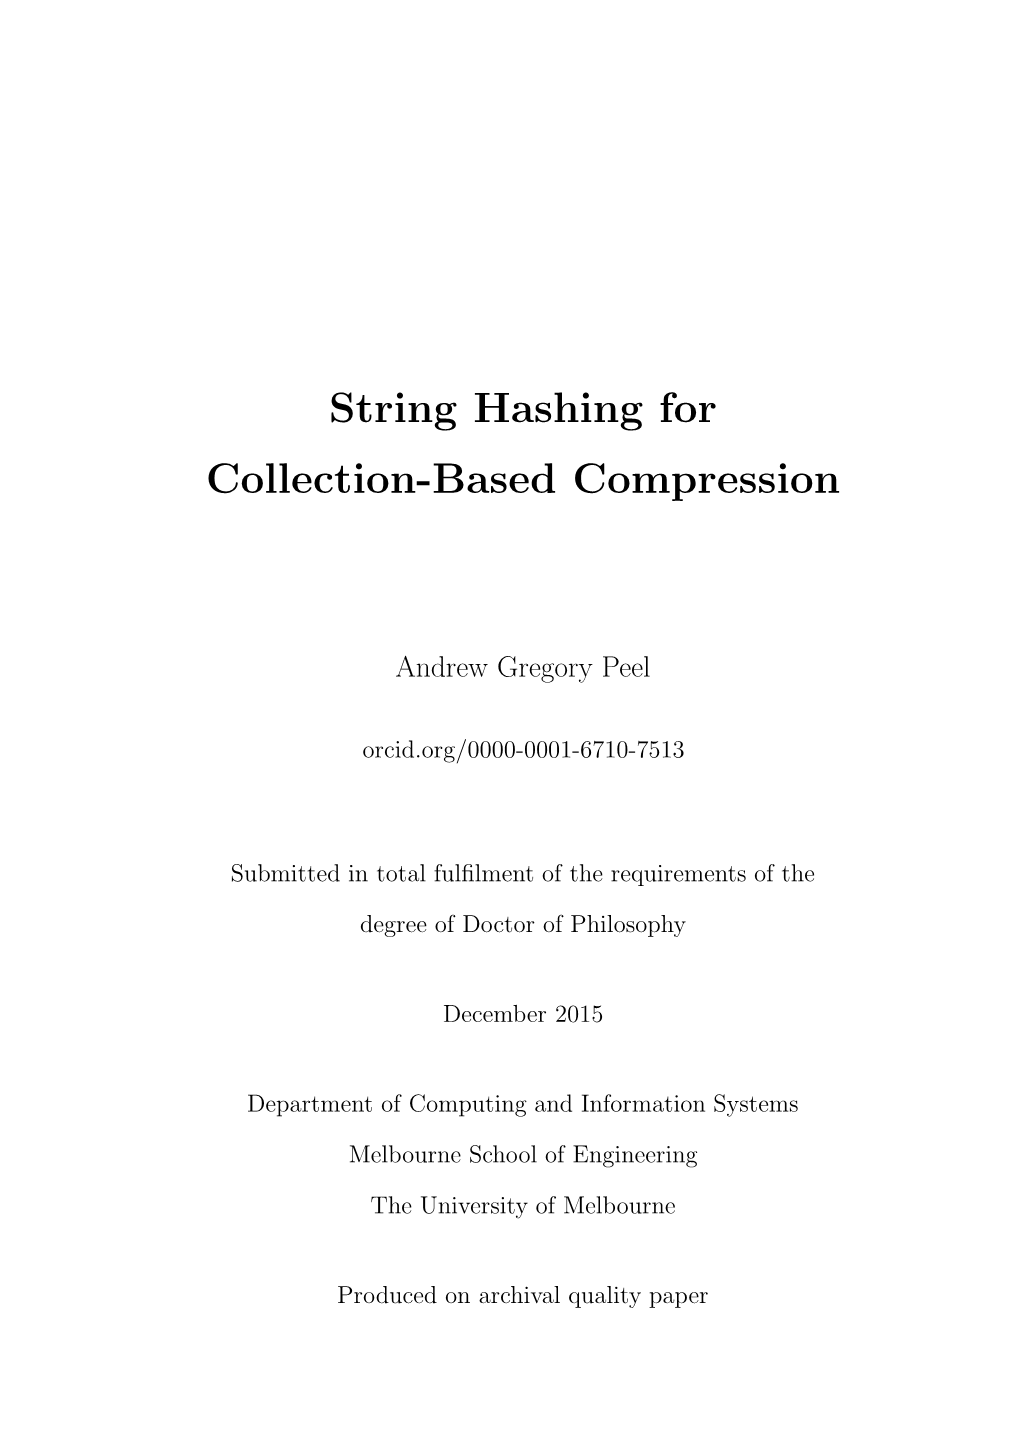 String Hashing for Collection-Based Compression